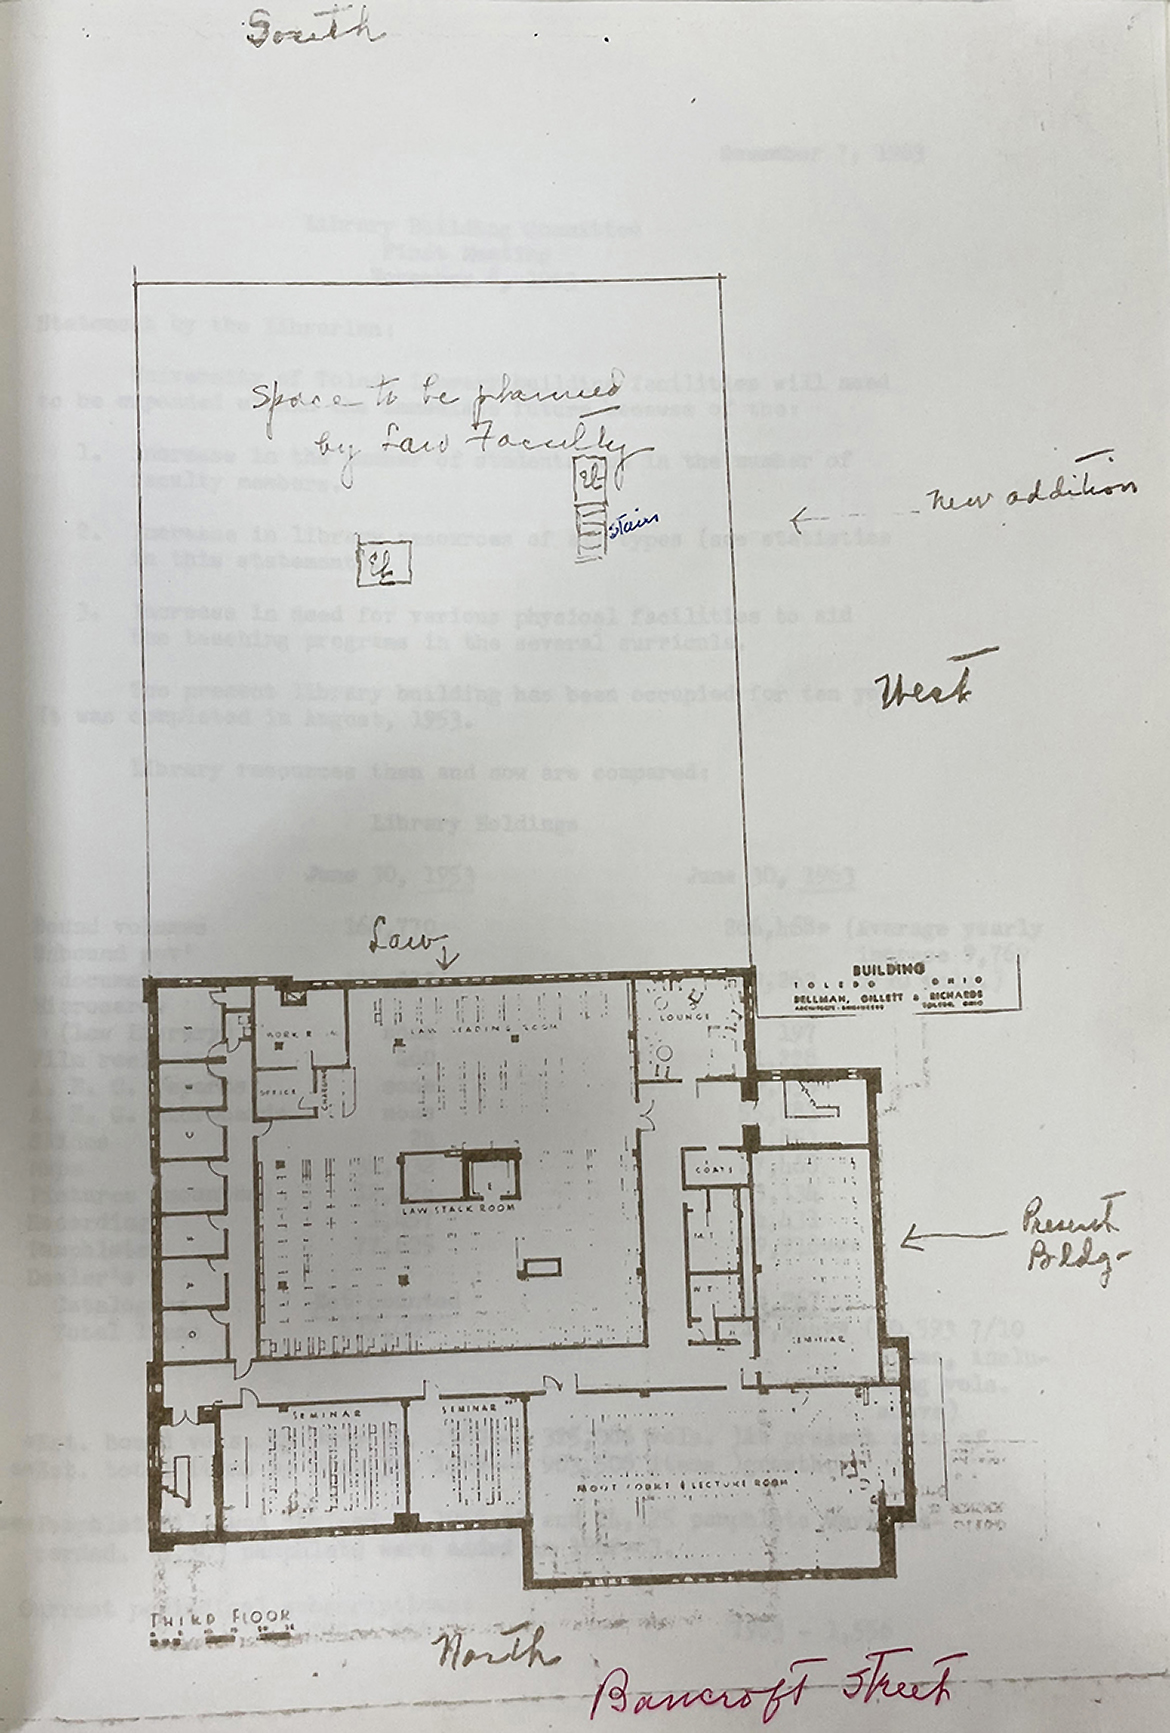 Blueprint of proposed addition south of the existing building